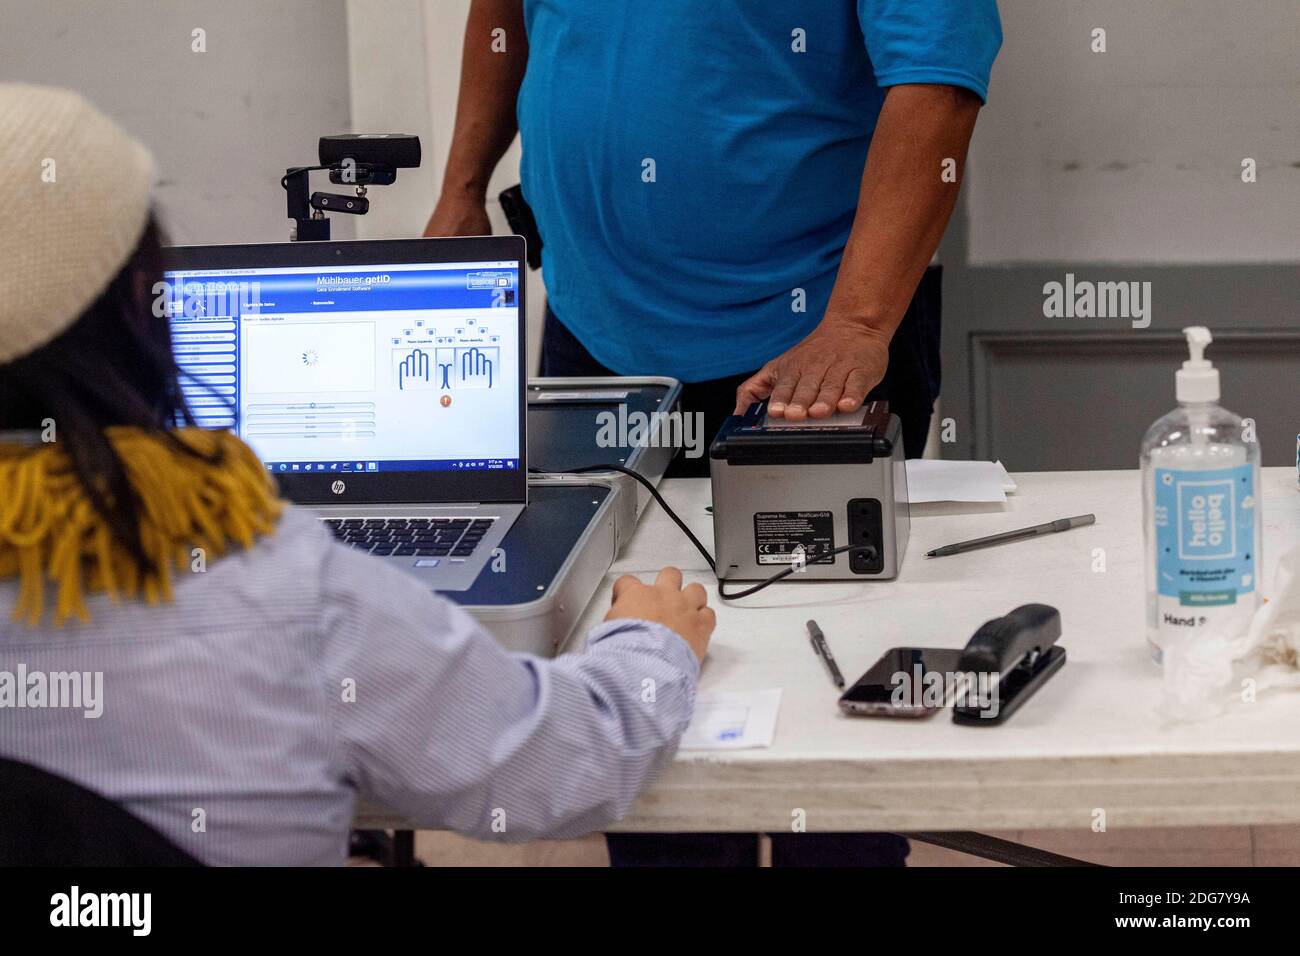 Columbus, Ohio, USA. 5th Dec, 2020. El Salvadoran immigrant gets his fingerprints scanned for his Documento Unico de Identidad (DUI), the national identification card of El Salvador.The El Salvadoran Consulate is responsible for processing identification materials for immigrants from El Salvador who live in 11 different states including North and South Dakota, Minnesota, Wisconsin, Illinois, Indiana, Michigan, Ohio, Iowa, Missouri and Kentucky. It is difficult for immigrants who do not live in Illinois to travel to Chicago, so the El Salvadoran consulate does a pop up in each sta Stock Photo